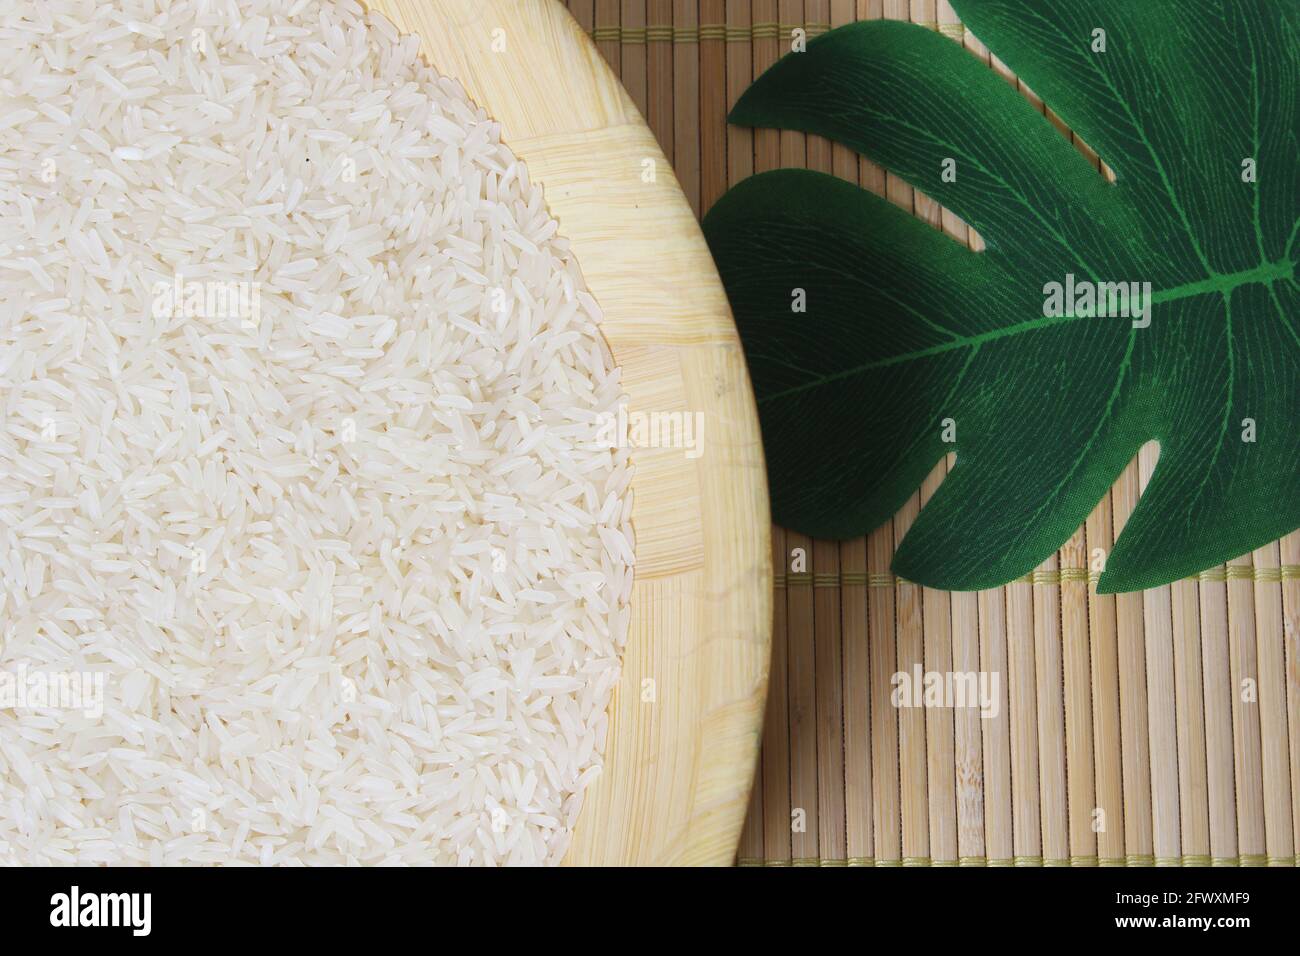 Bowl of Uncooked White Rice with leaf on bamboo mat Stock Photo